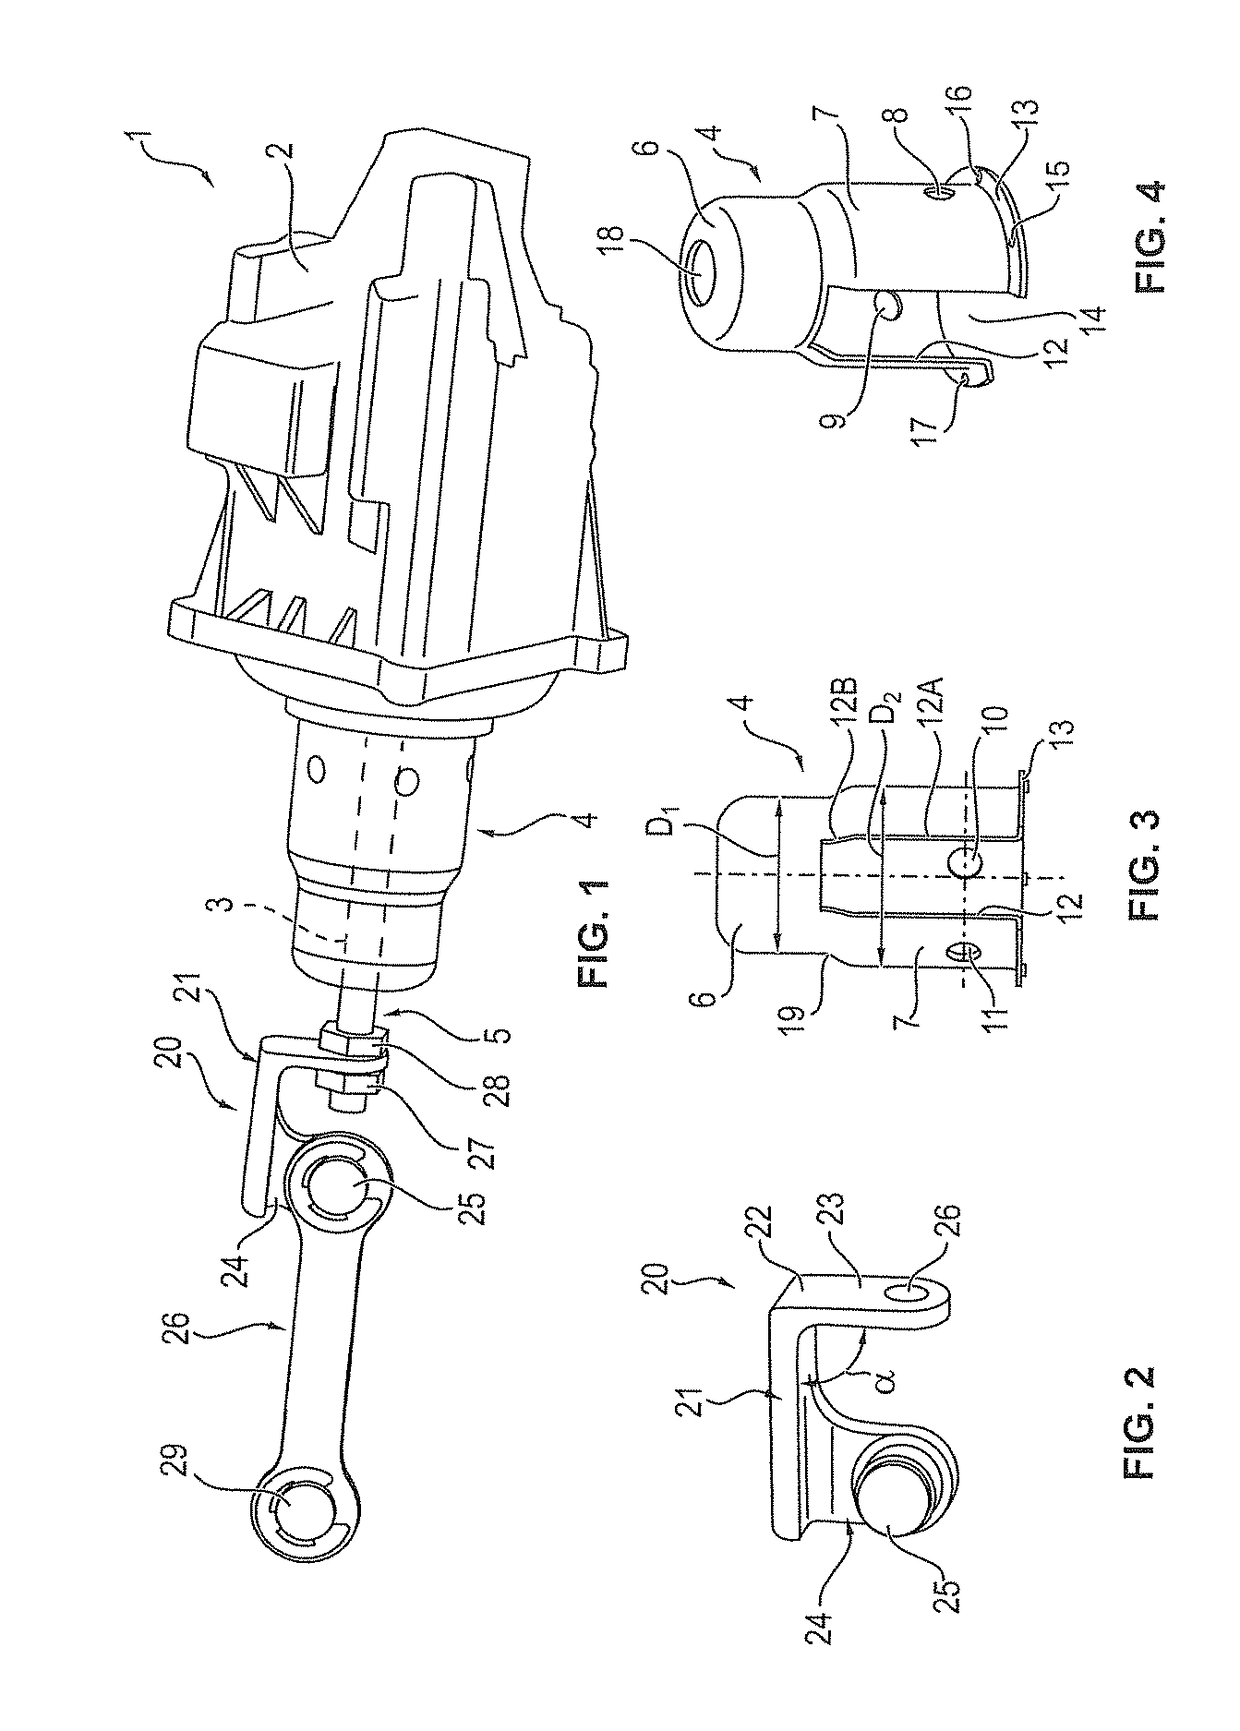 Actuation device, in particular electronic actuator